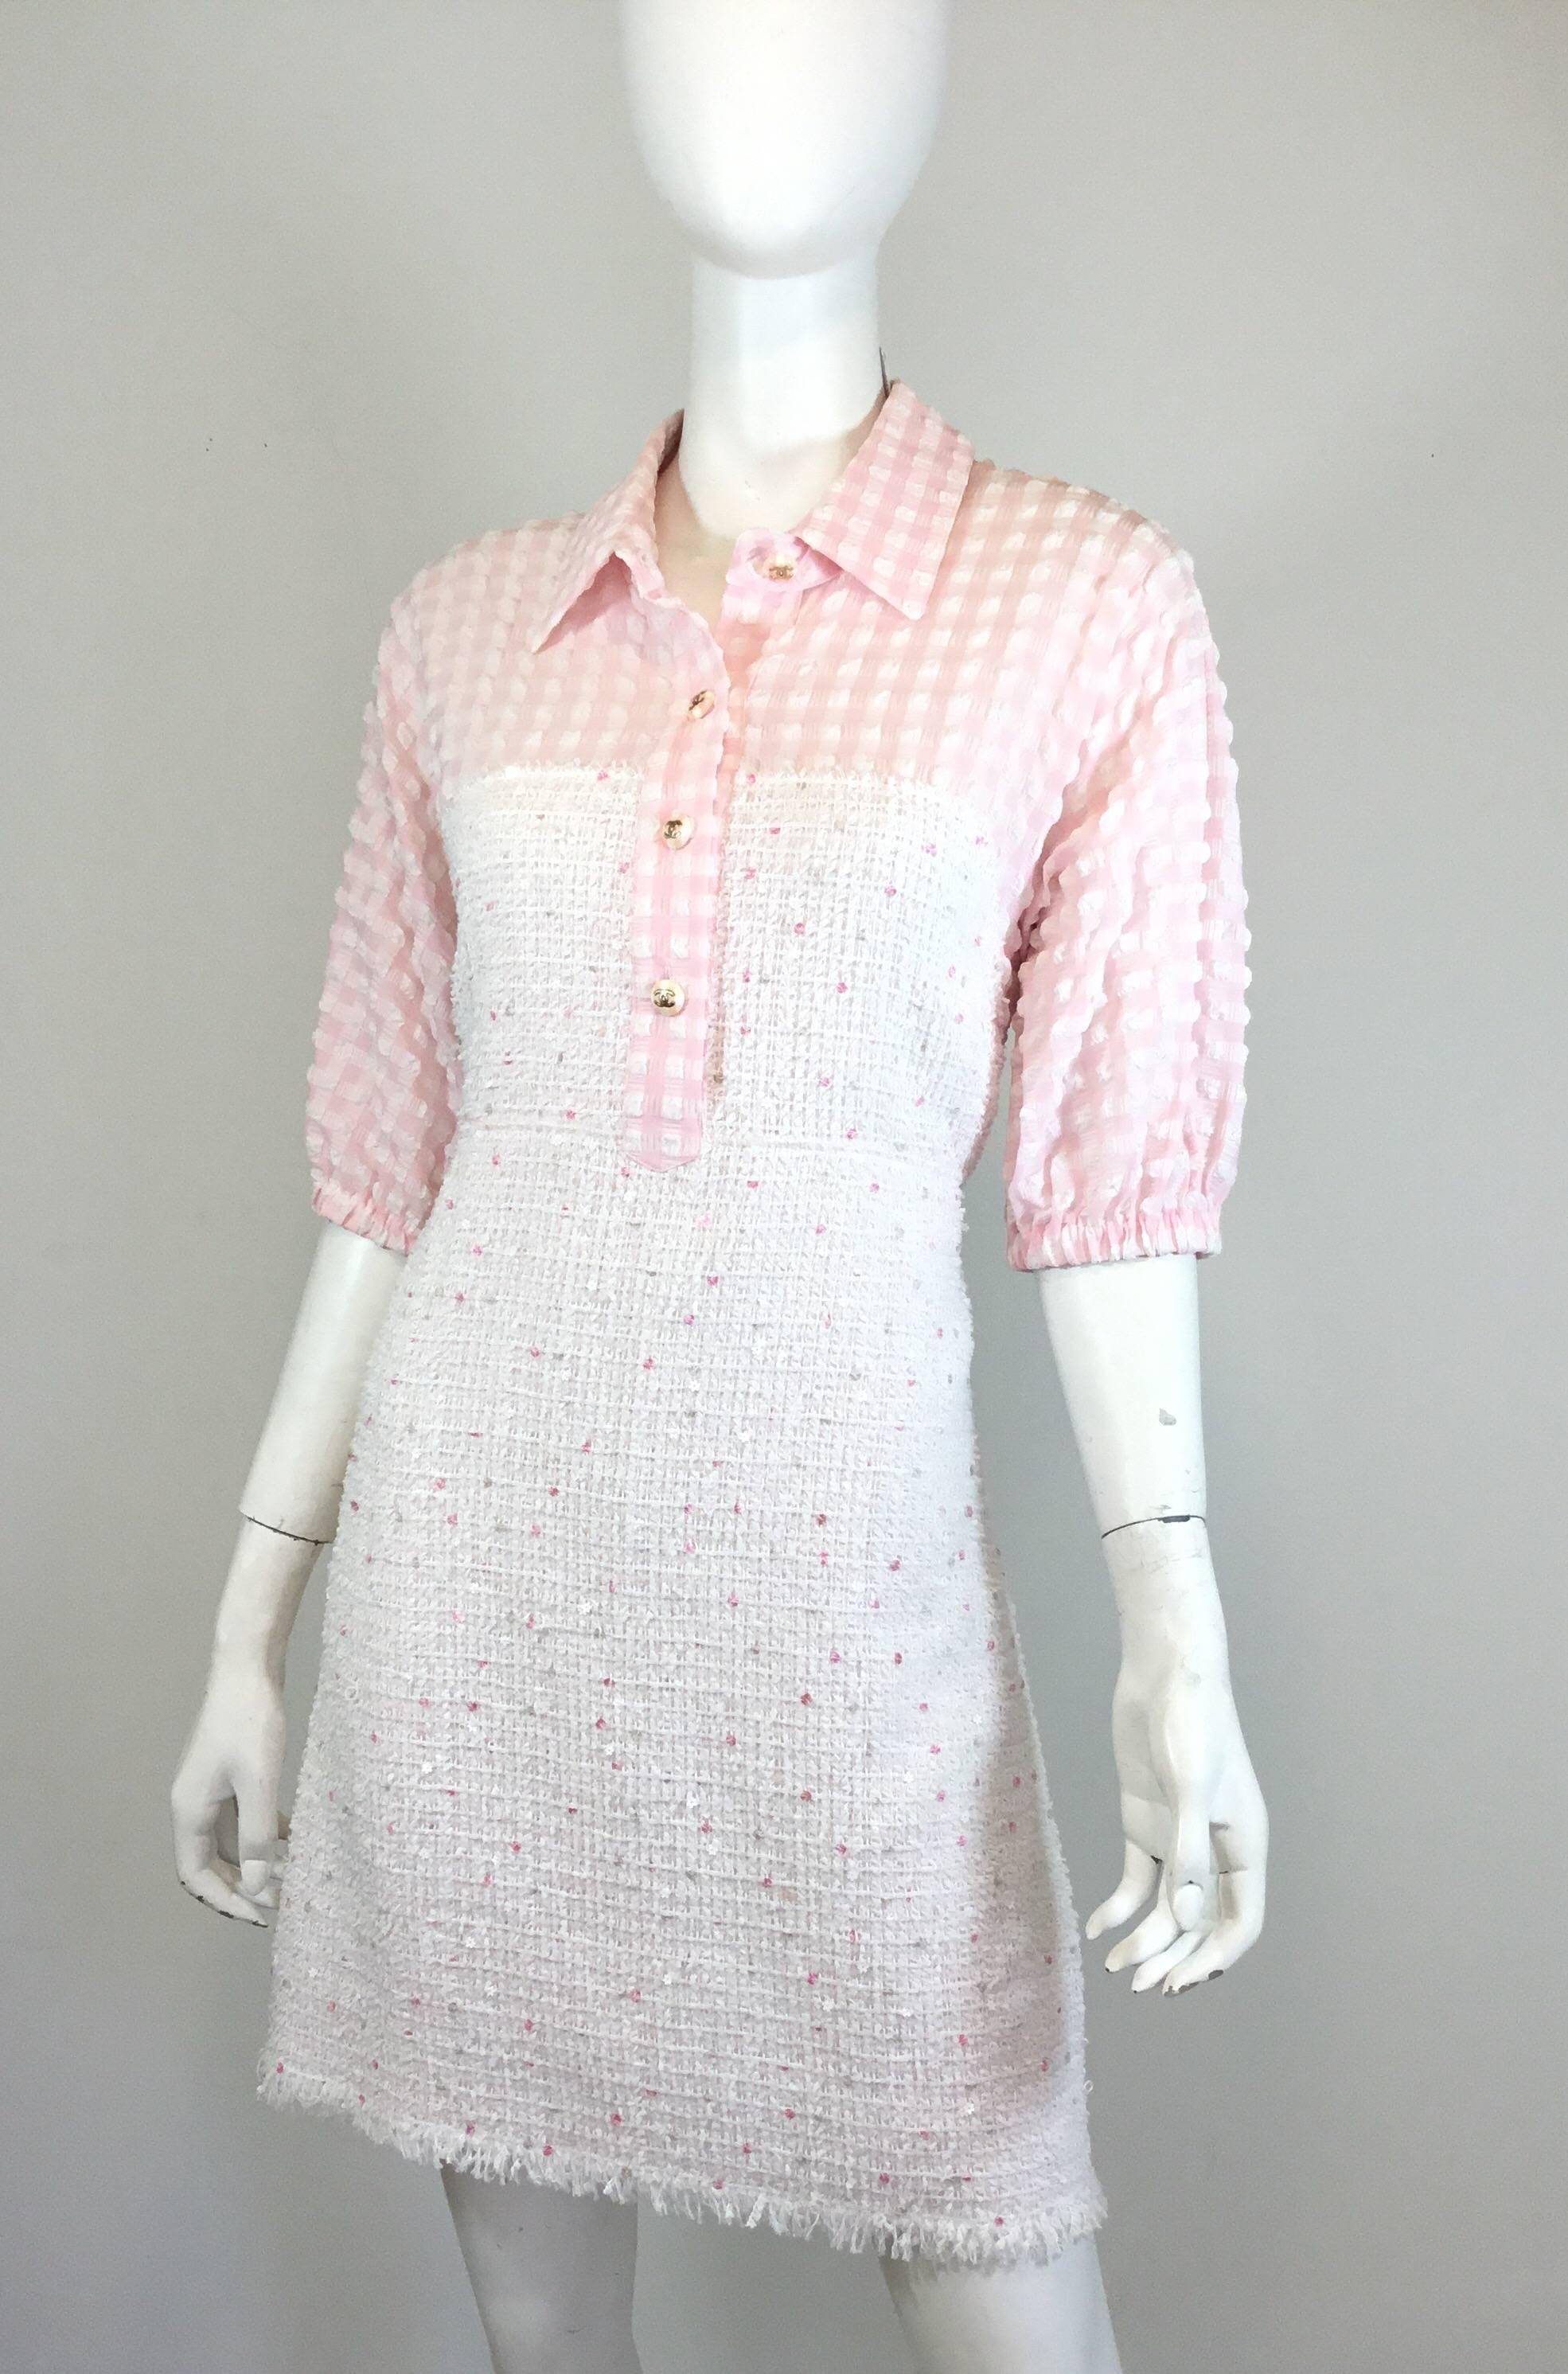 Chanel dress features a gingham top and tweed skirt with button front closures. Dress also has an open back design with hook and eye closures at the back neck and a zipper closure on the skirt. Fully lined, Size 42, made in France. 

Bust 36”, waist